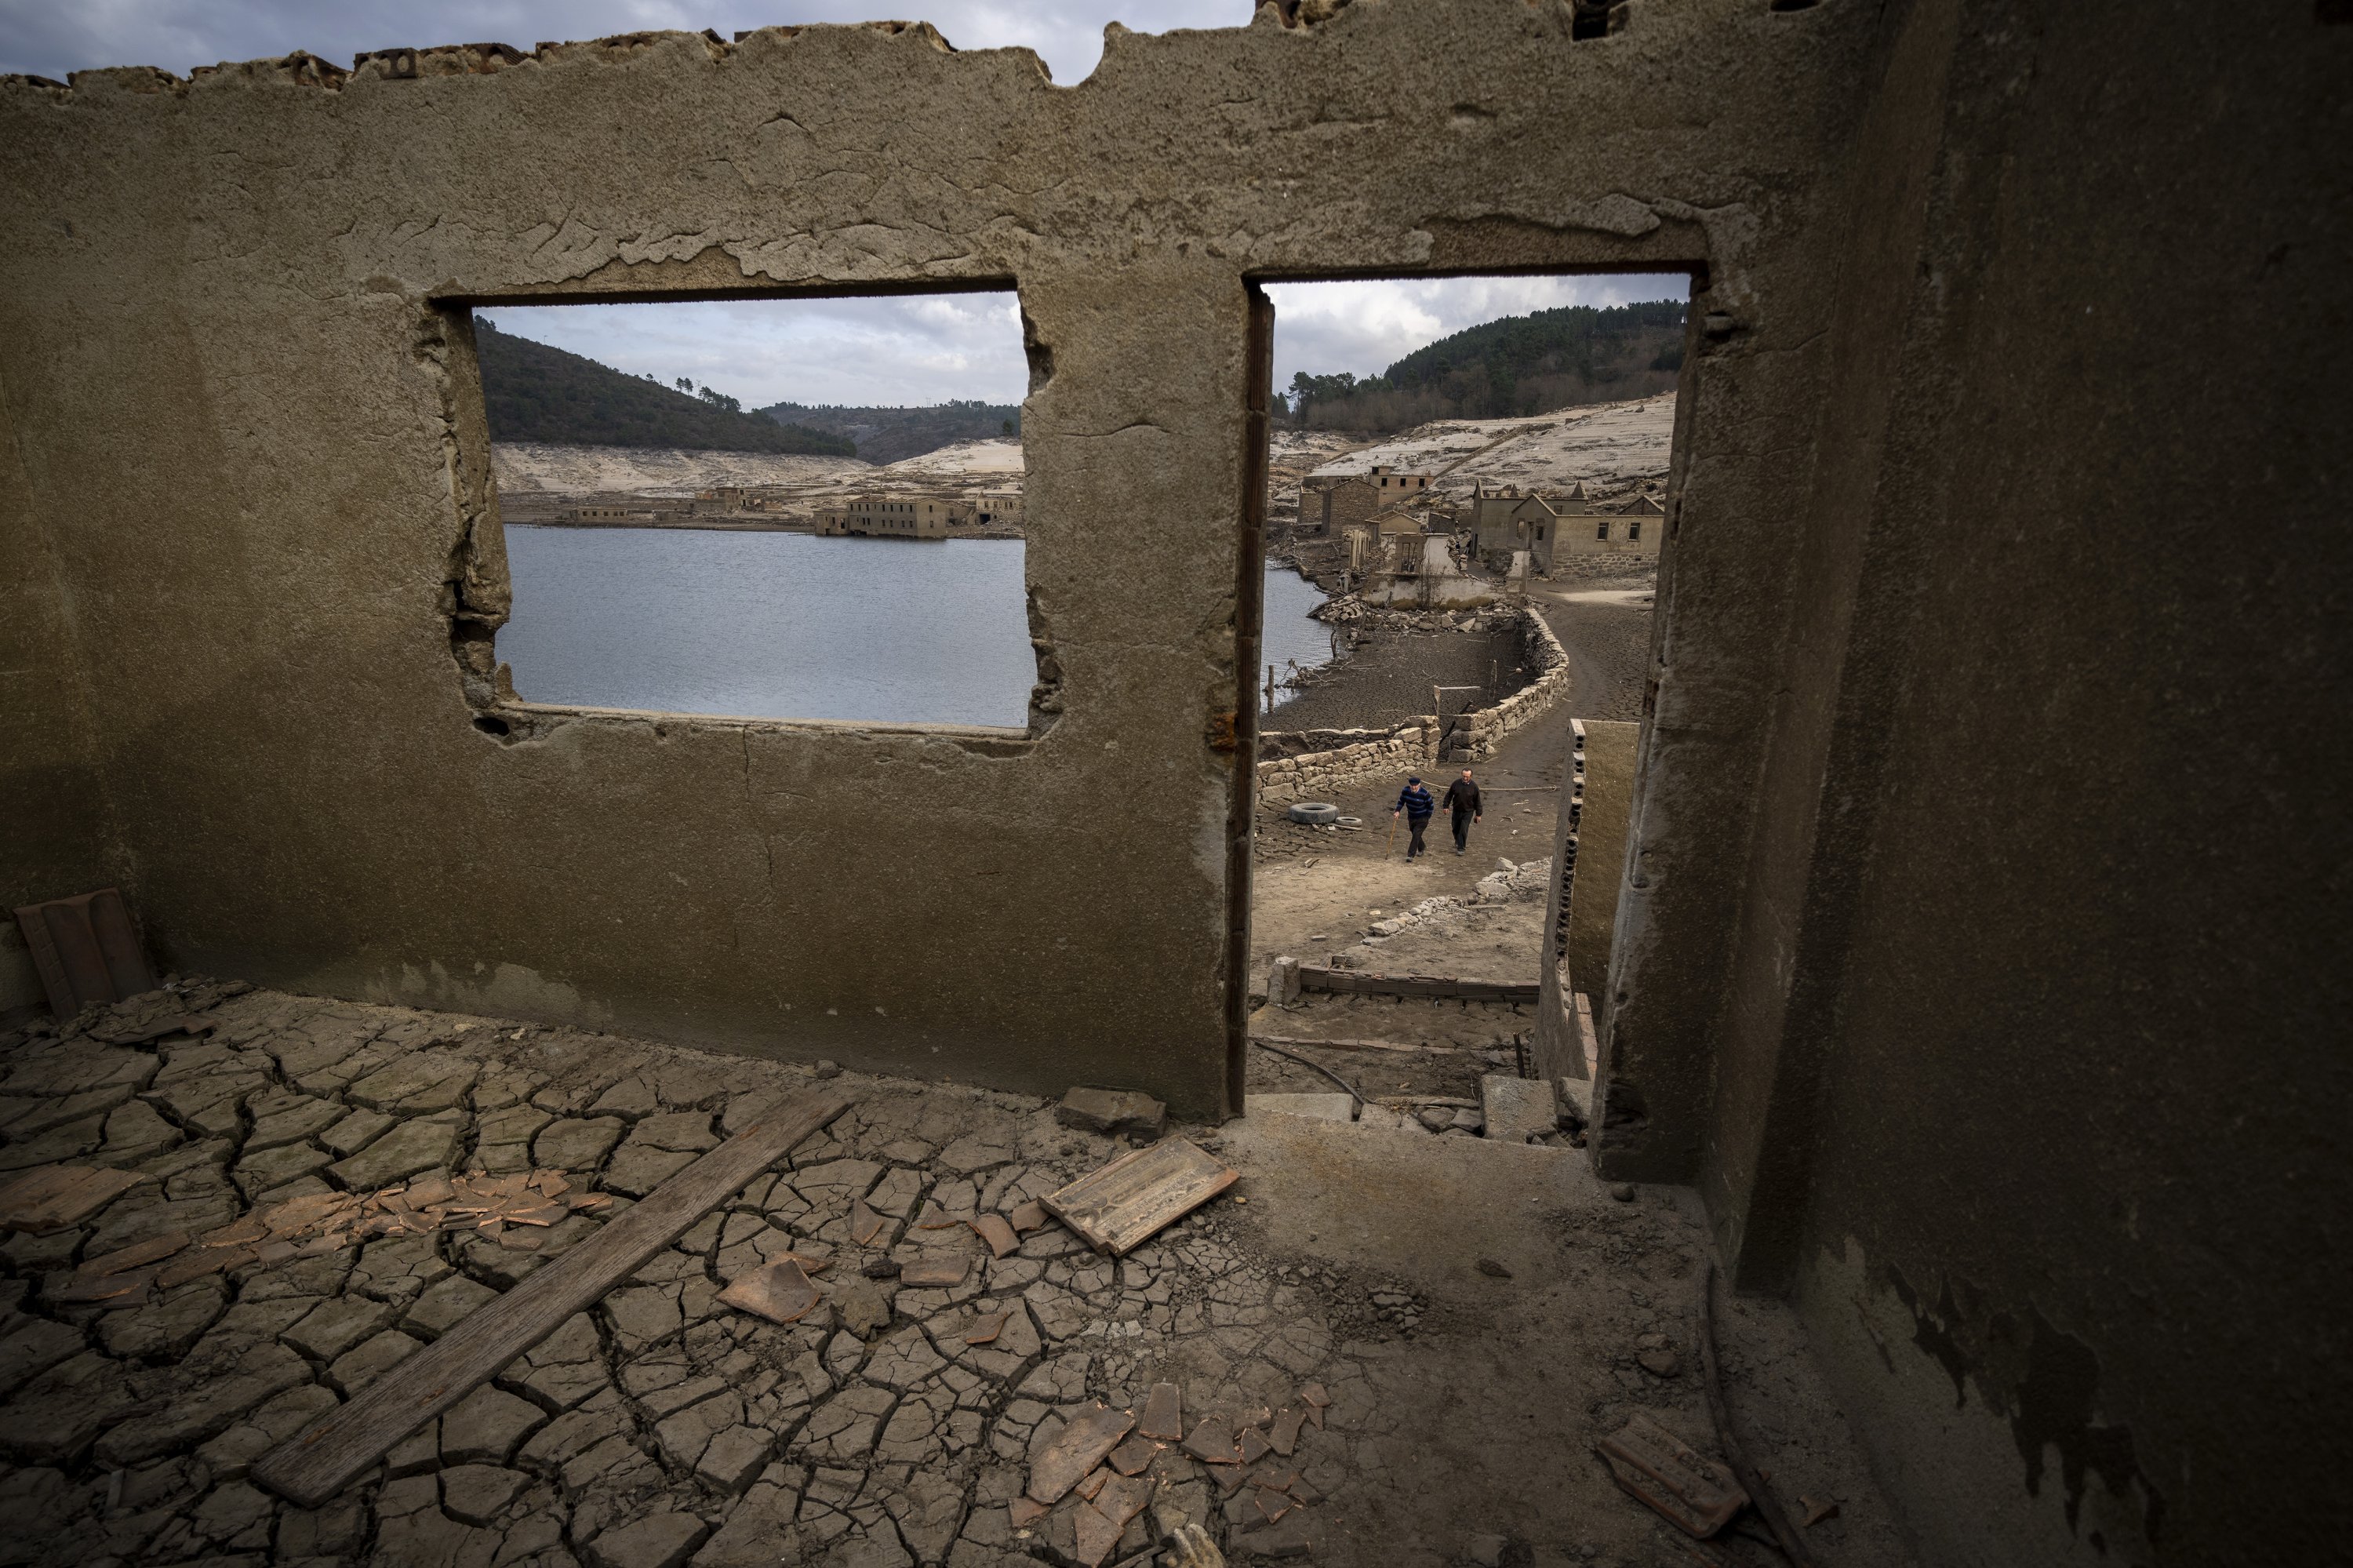 Jose Penin, 72, walks with his brother Julio, 78, as they visit the old village of Aceredo emerged due to drought at the Lindoso reservoir, in northwestern Spain, Feb. 11, 2022. (AP Photo)